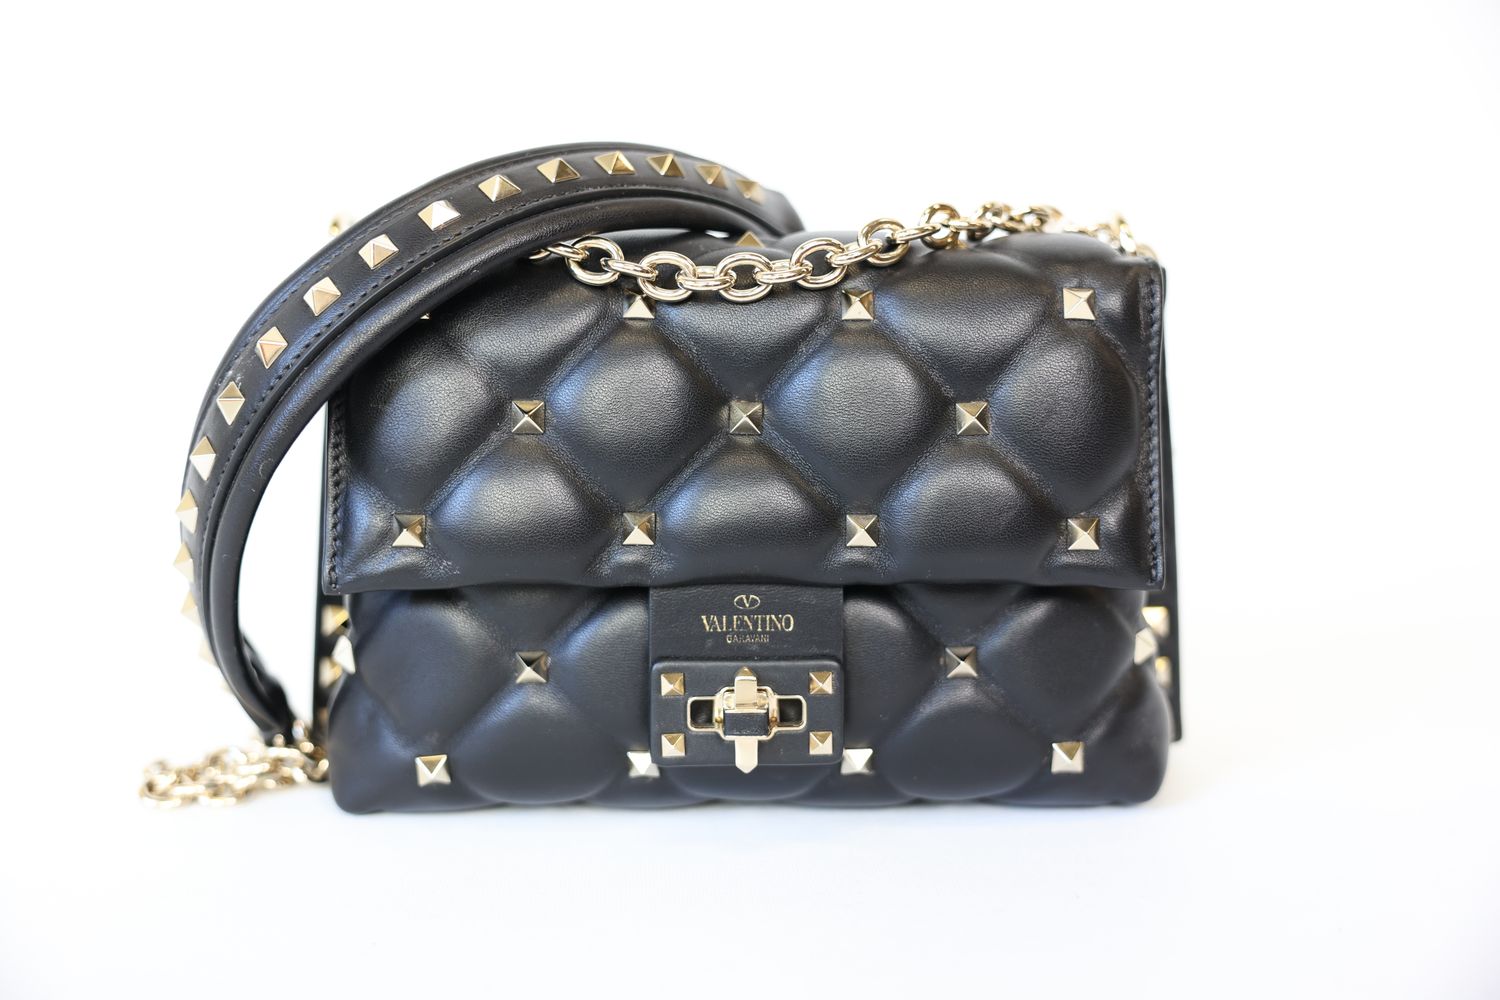 Valentino Garavani Candystud Flap, Black Leather With God Hardware, Preowned In Dustbag WA001